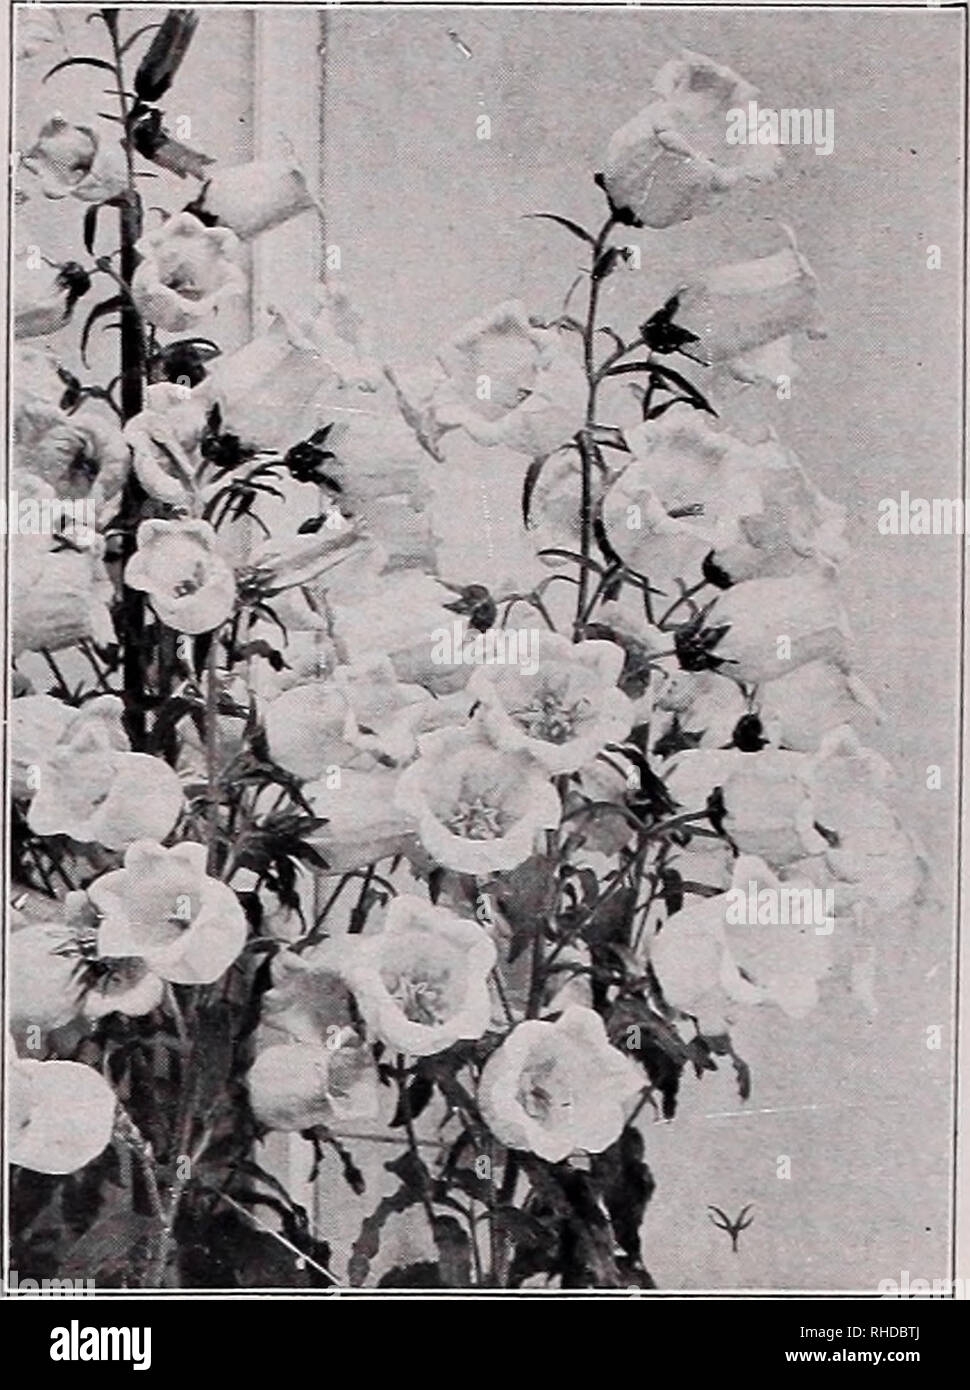 . Book for florists : spring 1938. Flowers Seeds Catalogs; Bulbs (Plants) Seedlings Catalogs; Vegetables Seeds Catalogs; Trees Seeds Catalogs; Horticulture Equipment and supplies Catalogs. BELLIS Perennis Fl. PI. Superbissima Giant. Seeds of Biennials and Hardy Perennials AUBRIETIA—Continued Trade pkt.Oz. Rosea Grandiflora. X Pink, 6 in }4 oz., 40c$0.25 .... Whitewell Gem. X Purple, 6 in y% oz., 50c .25 Auricula. See Primula. Baby's Breath. See Gypsophila Paniculata. Baptisia Australis (False Indigo). Beautiful racemes of pea-shaped indigo-blue flowers. 2-4 ft., lb., $4.00 .10 $0.30 Bellis Per Stock Photo